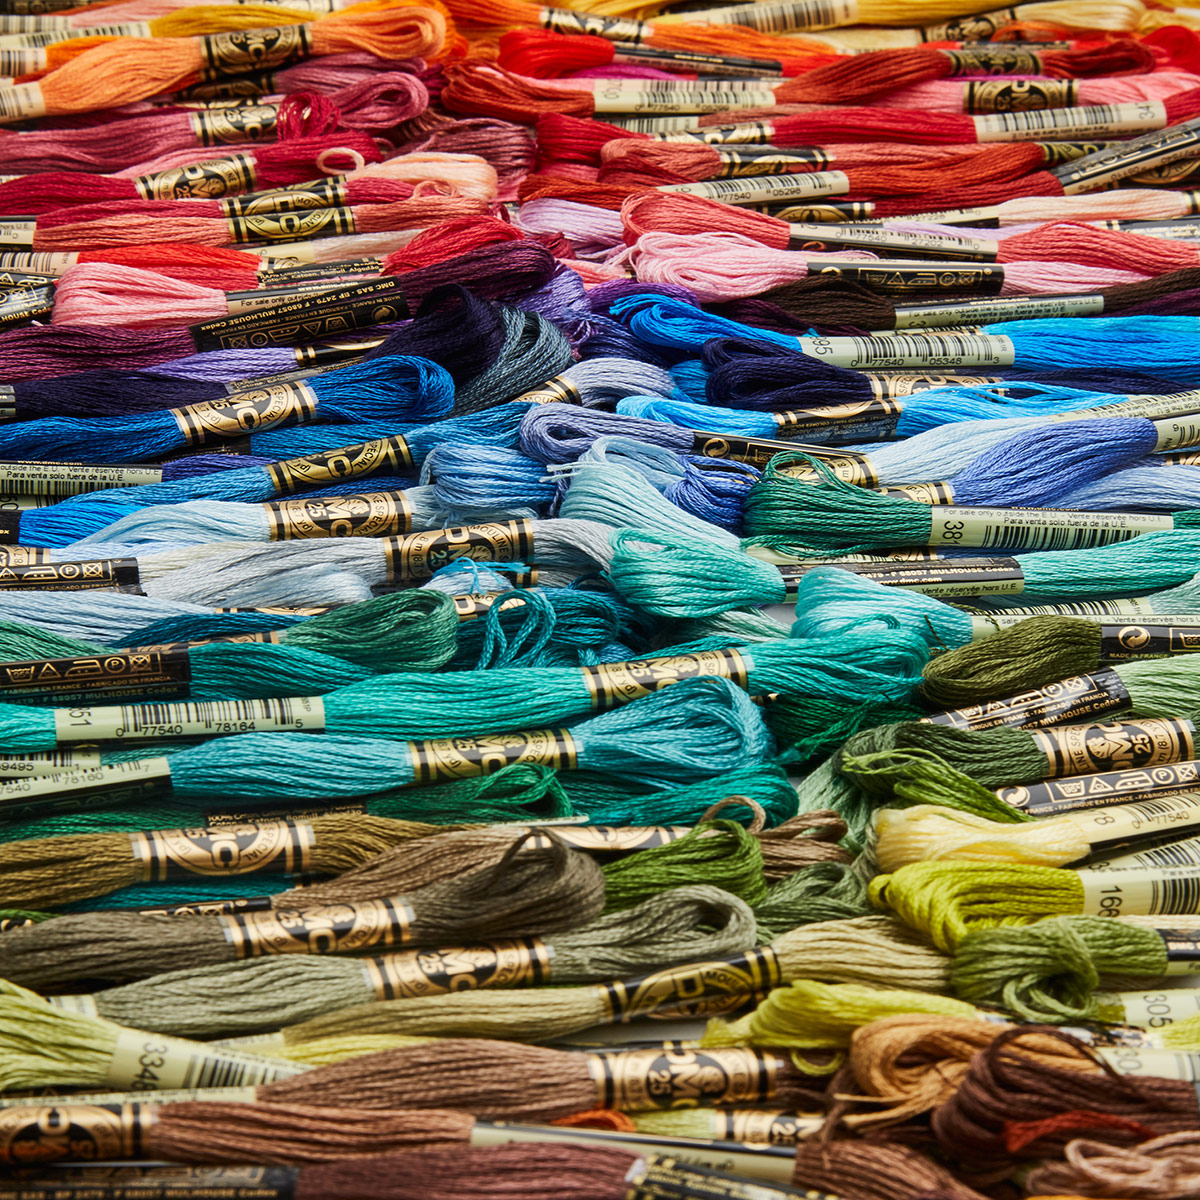 Embroidery Floss by the skein